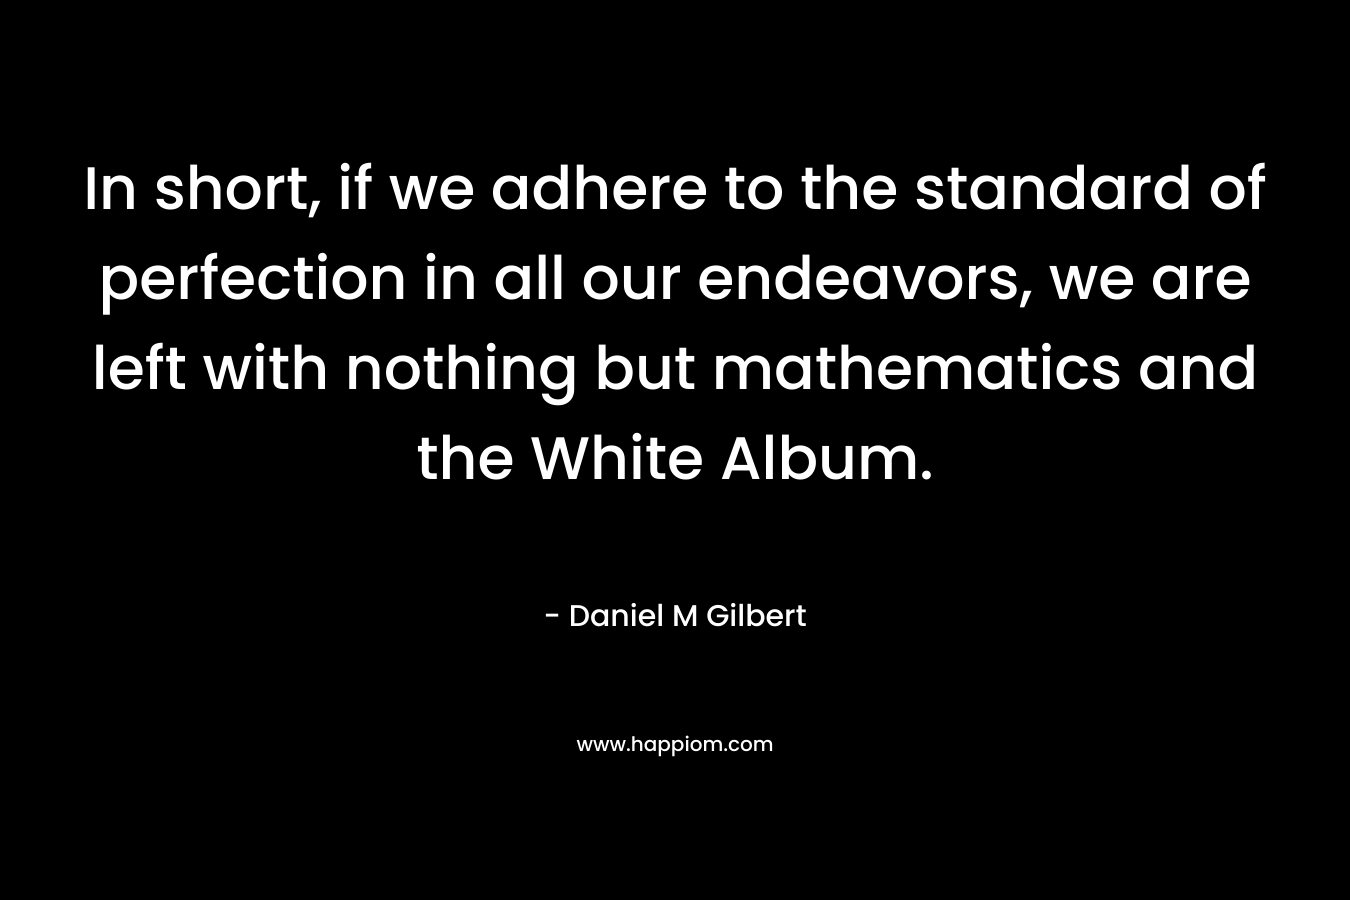 In short, if we adhere to the standard of perfection in all our endeavors, we are left with nothing but mathematics and the White Album. – Daniel M Gilbert